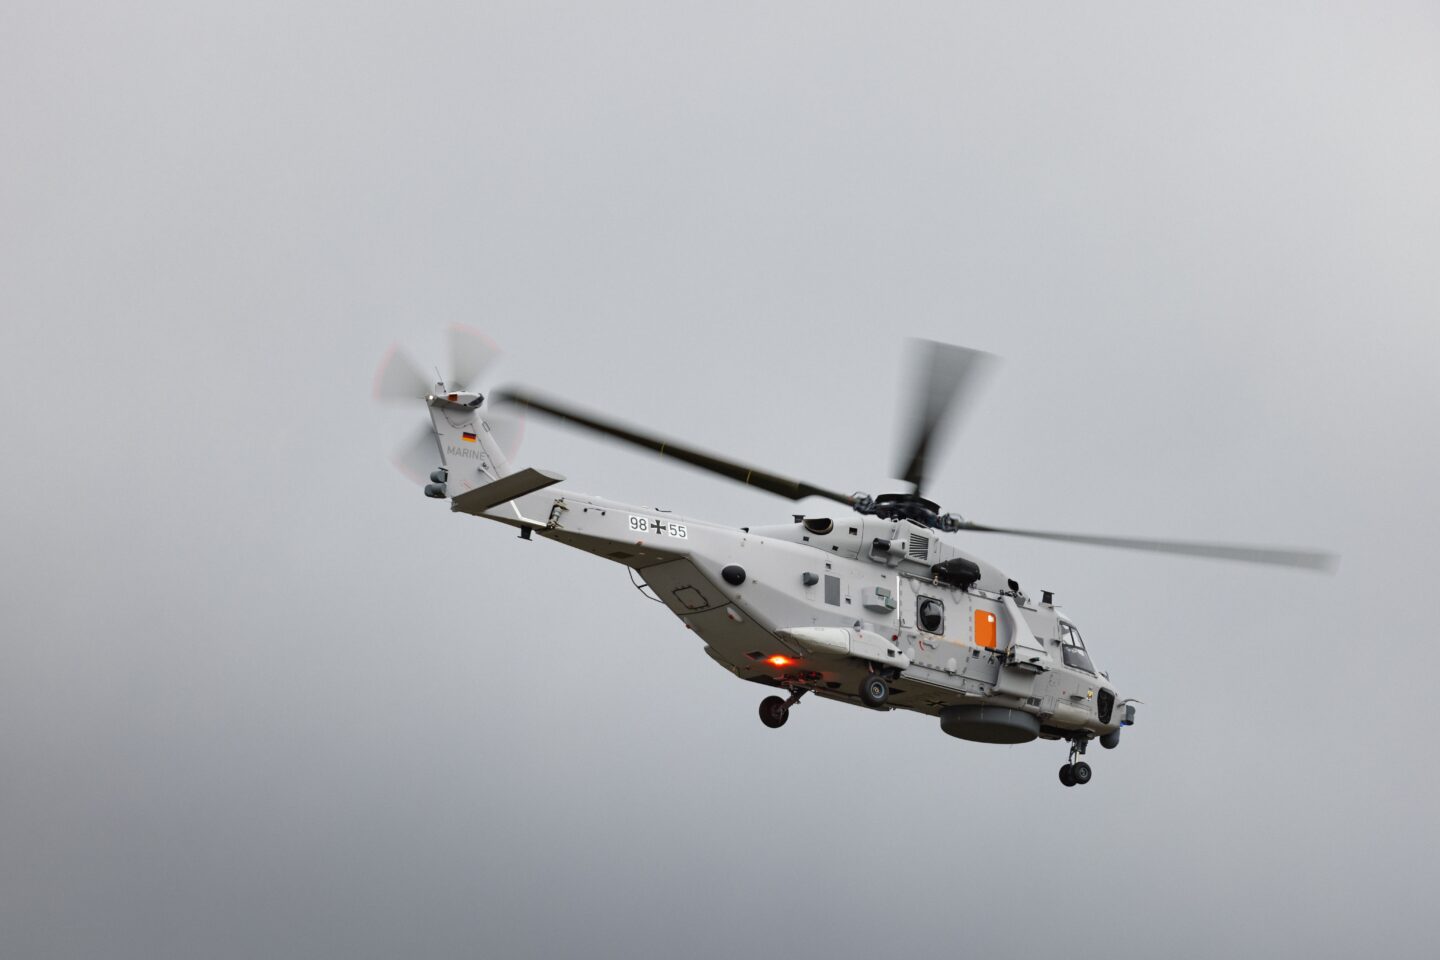 The German navy's NH90 Sea Tiger anti-submarine helicopter made its first flight on Thursday.